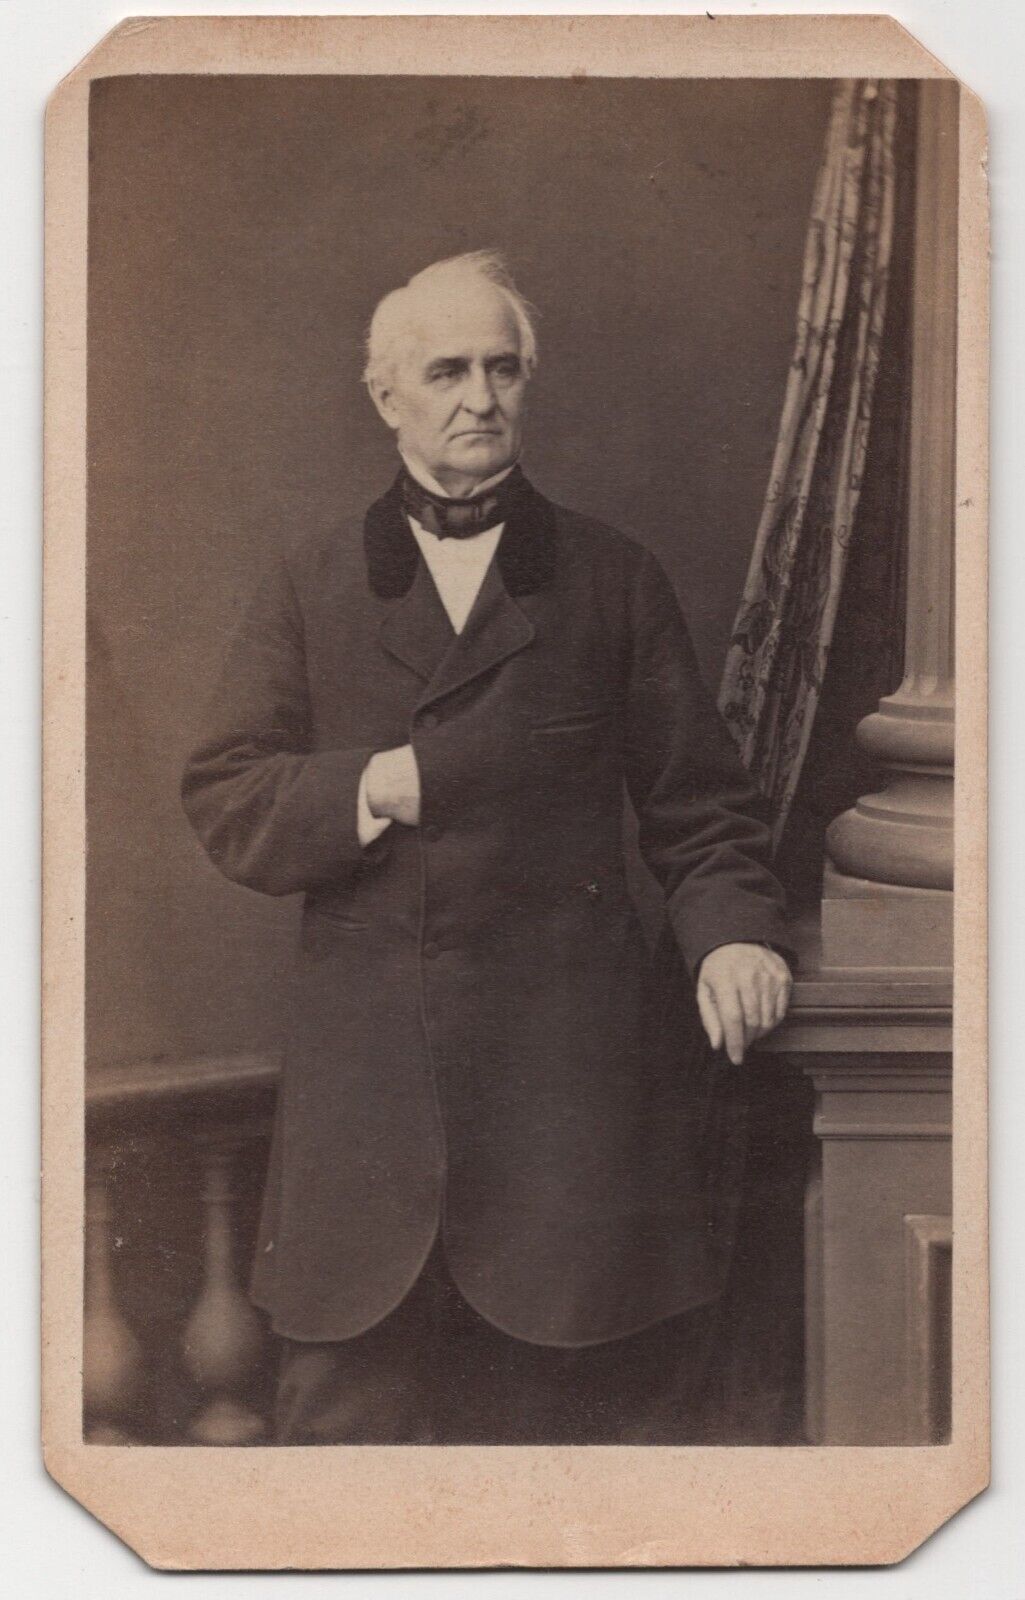 ANTIQUE CDV C. 1860s OLD MAN IN SUIT NAPOLEON STYLE R.A. LEWIS CHATHAM NEW YORK